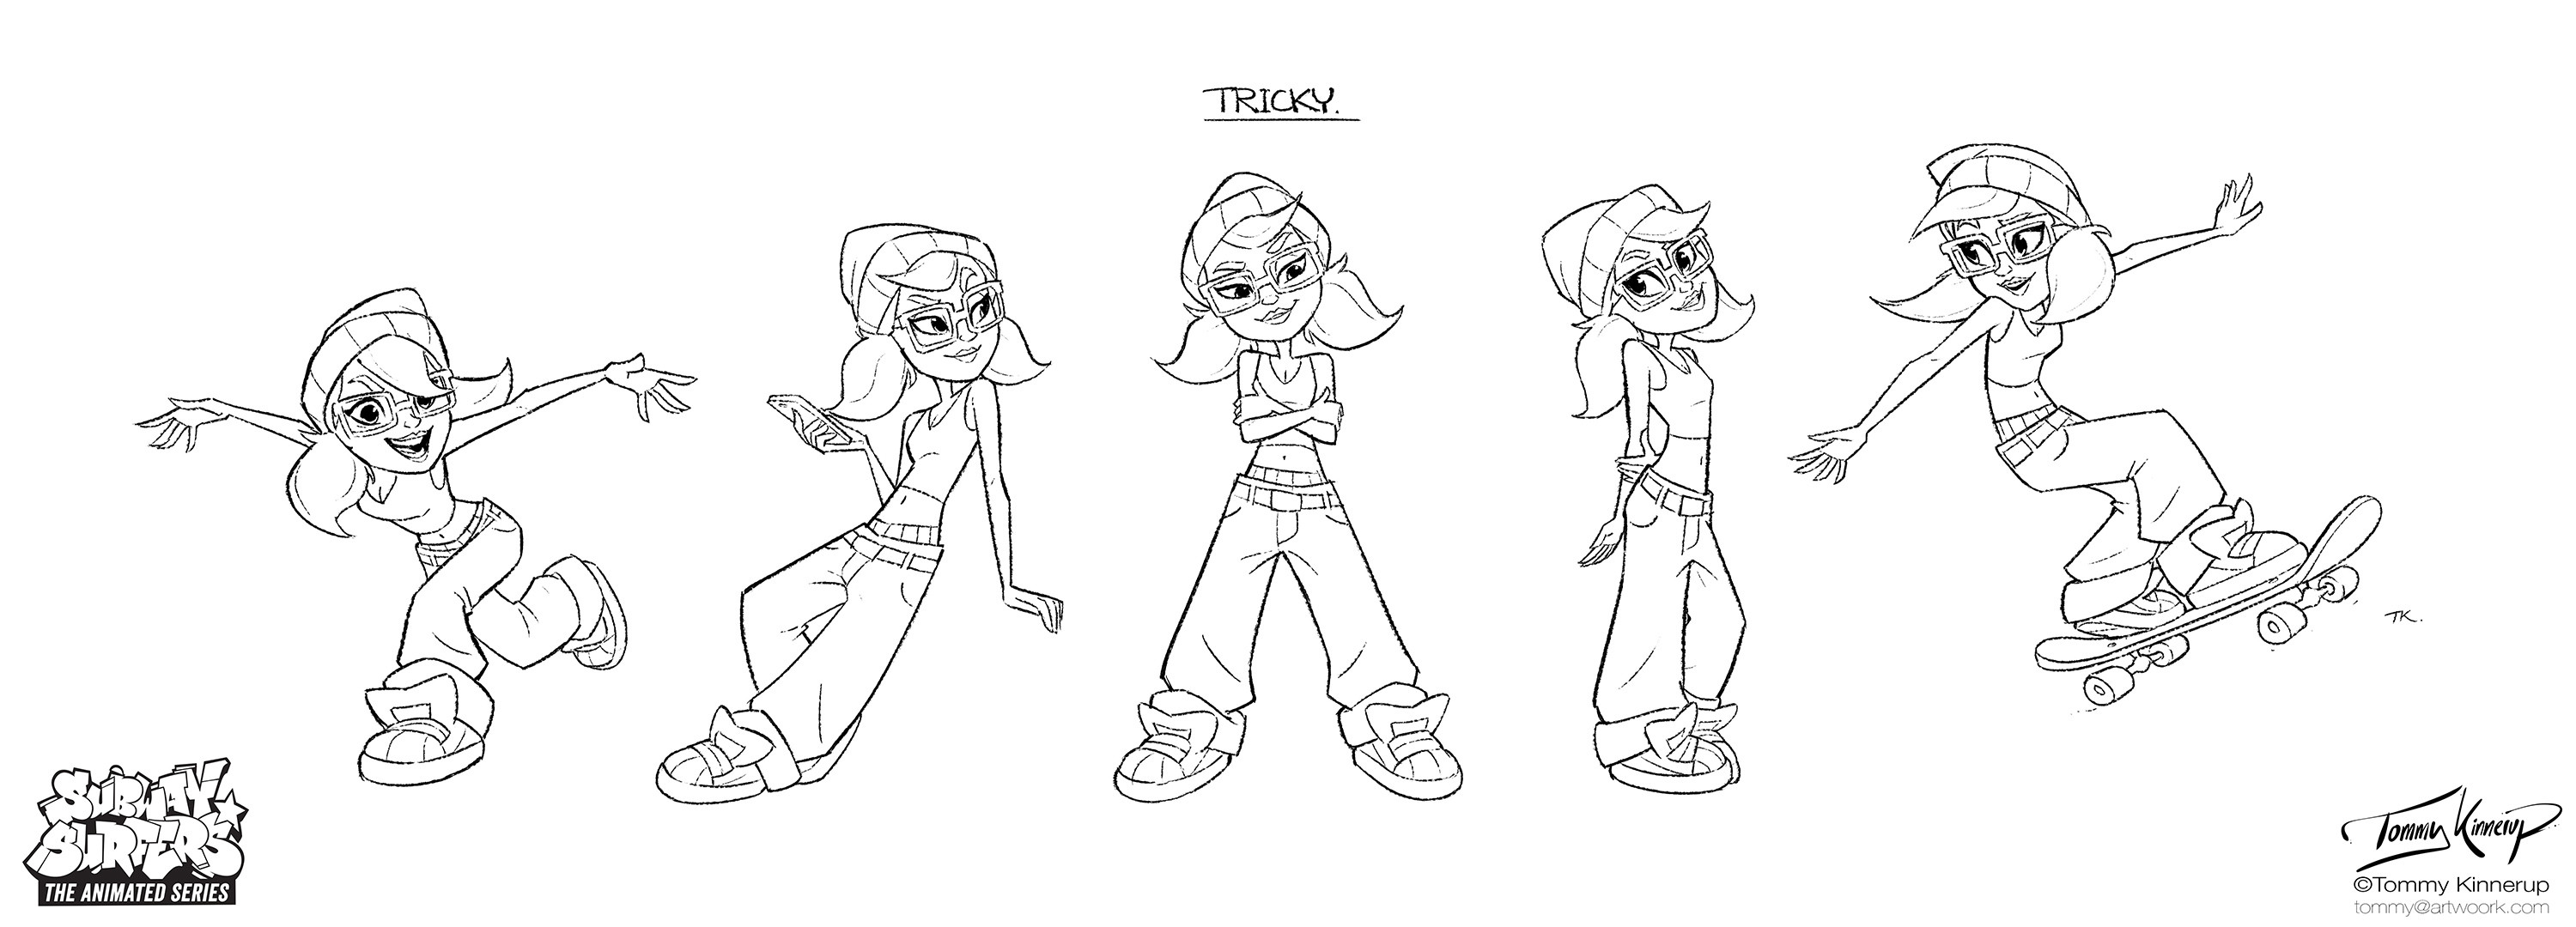 Tricky's poses